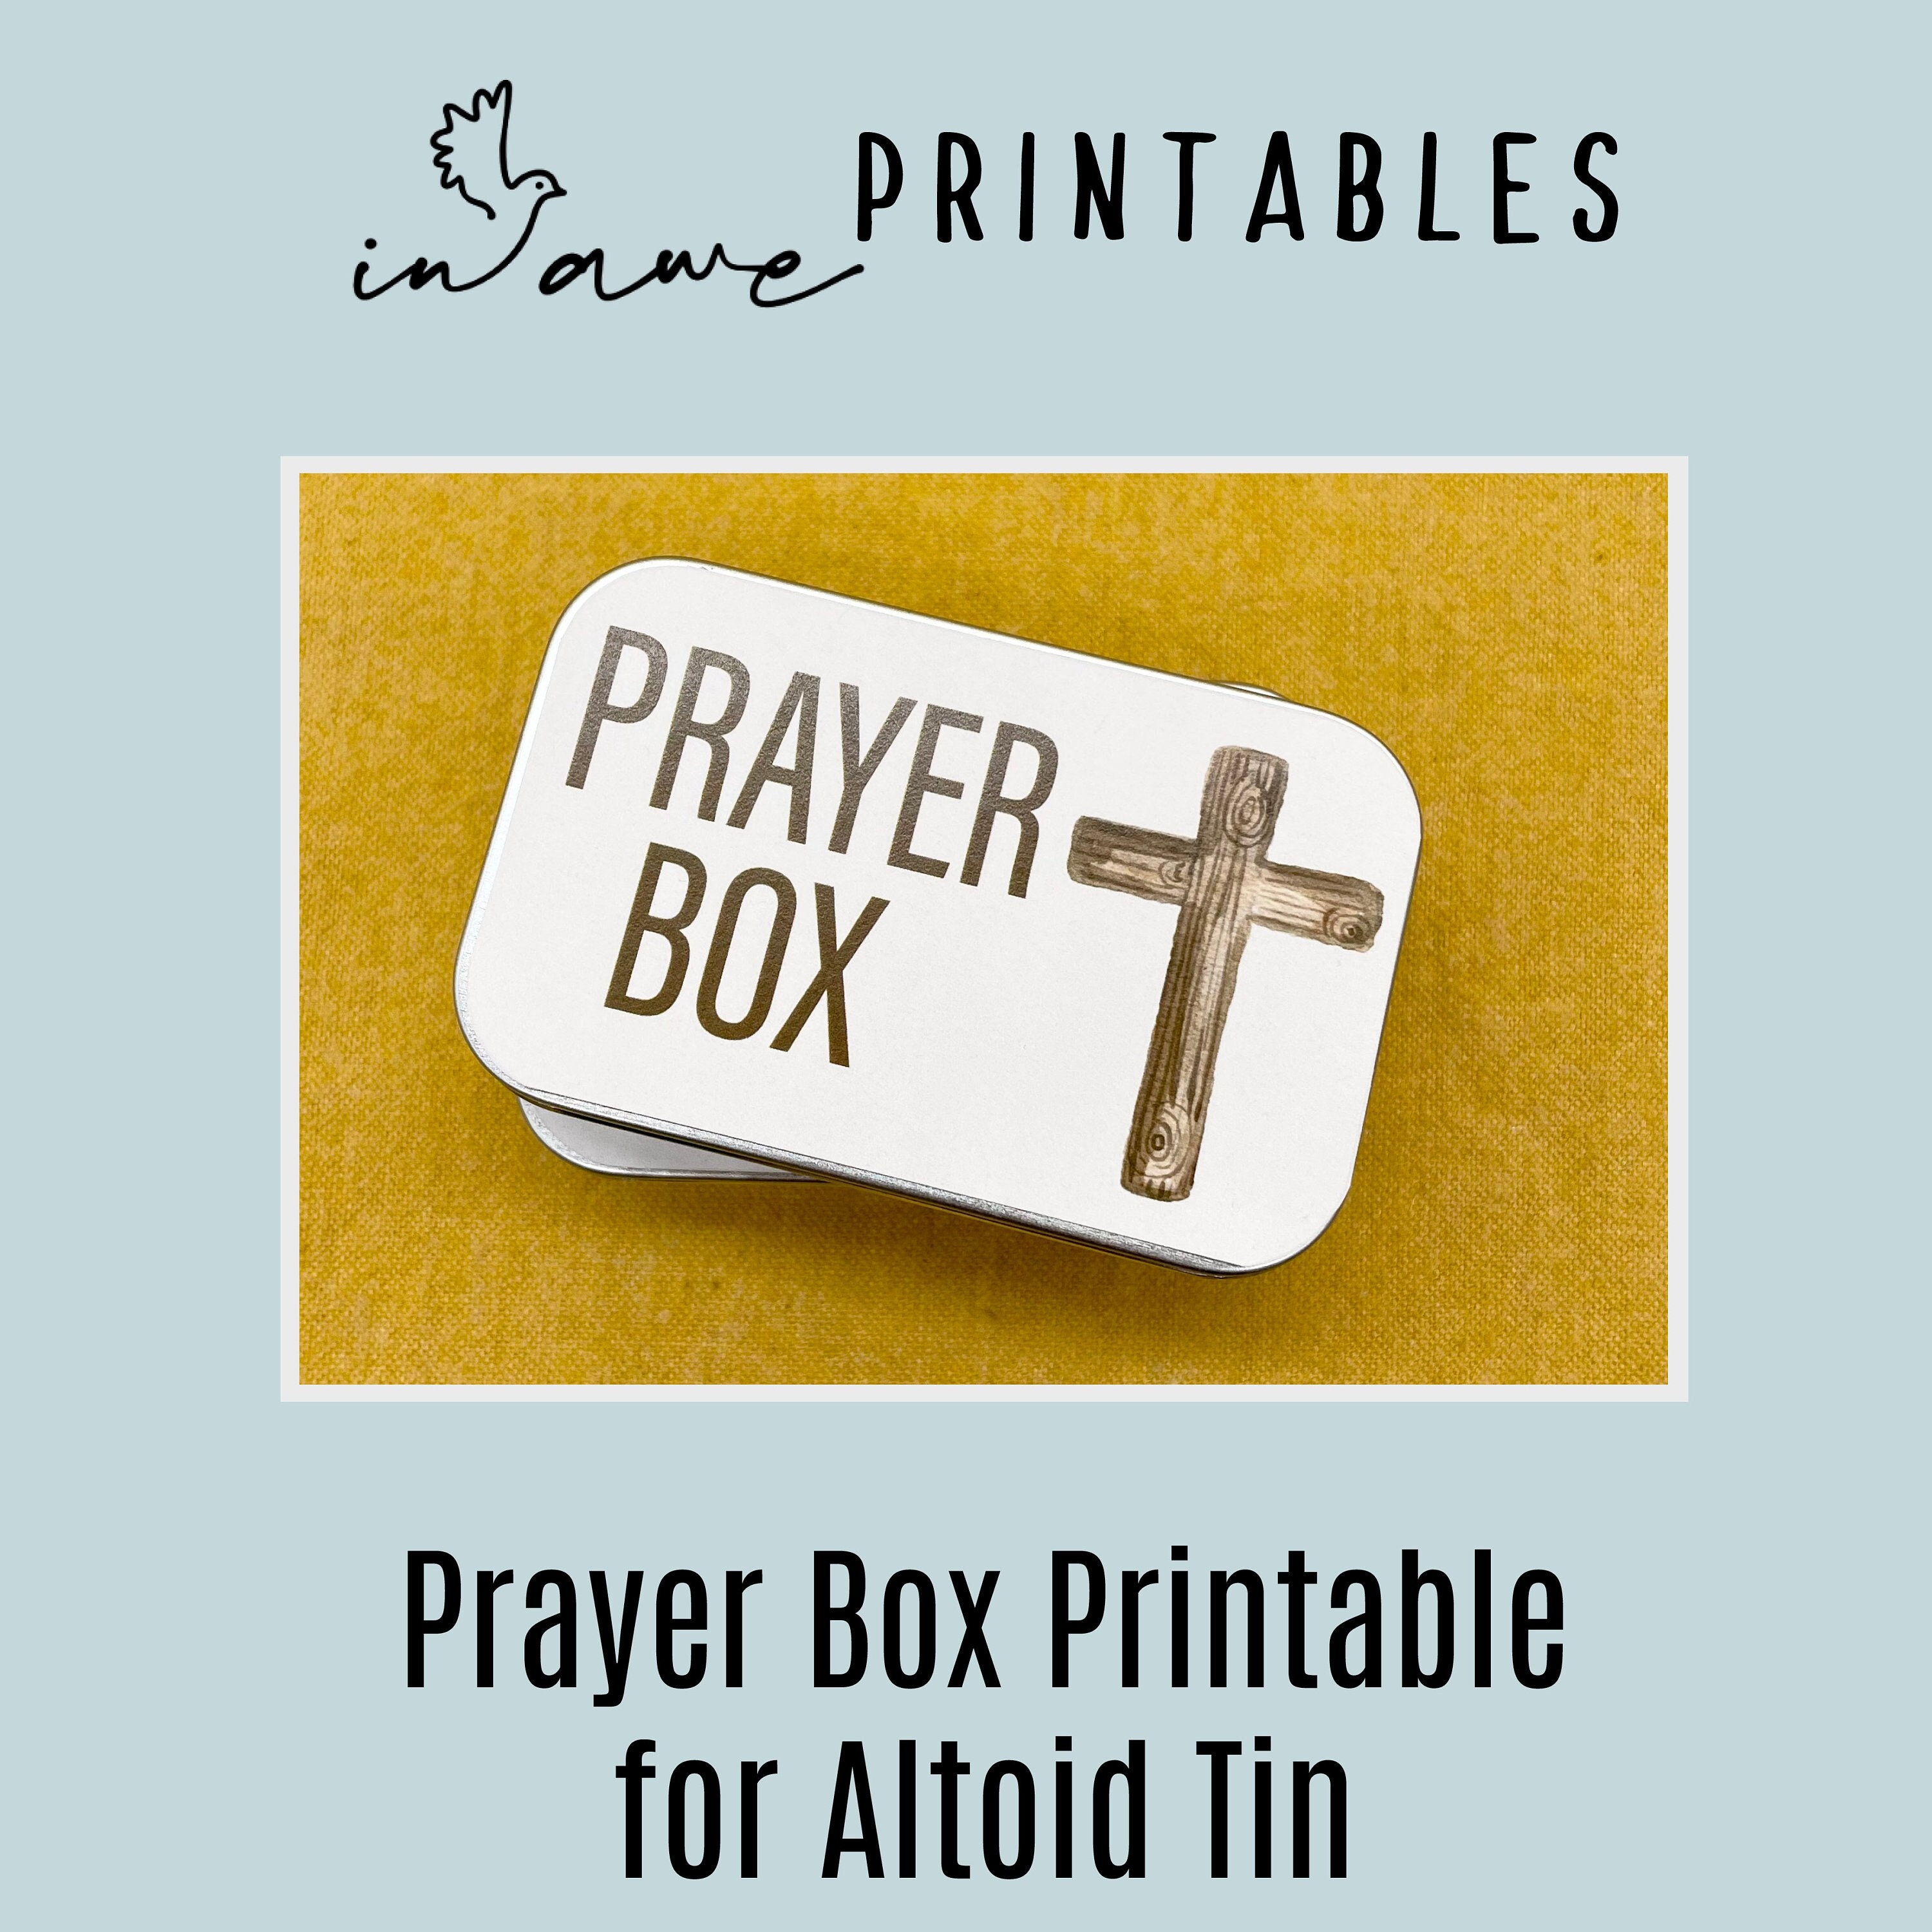 4 Tins With Lids: 1 Candy Tin and 1 Prayer Box With Hinged Lids, 2 Coffee  Tins With Plastic Lids, Crafting, Sewing Kit, to Hold Treasures 